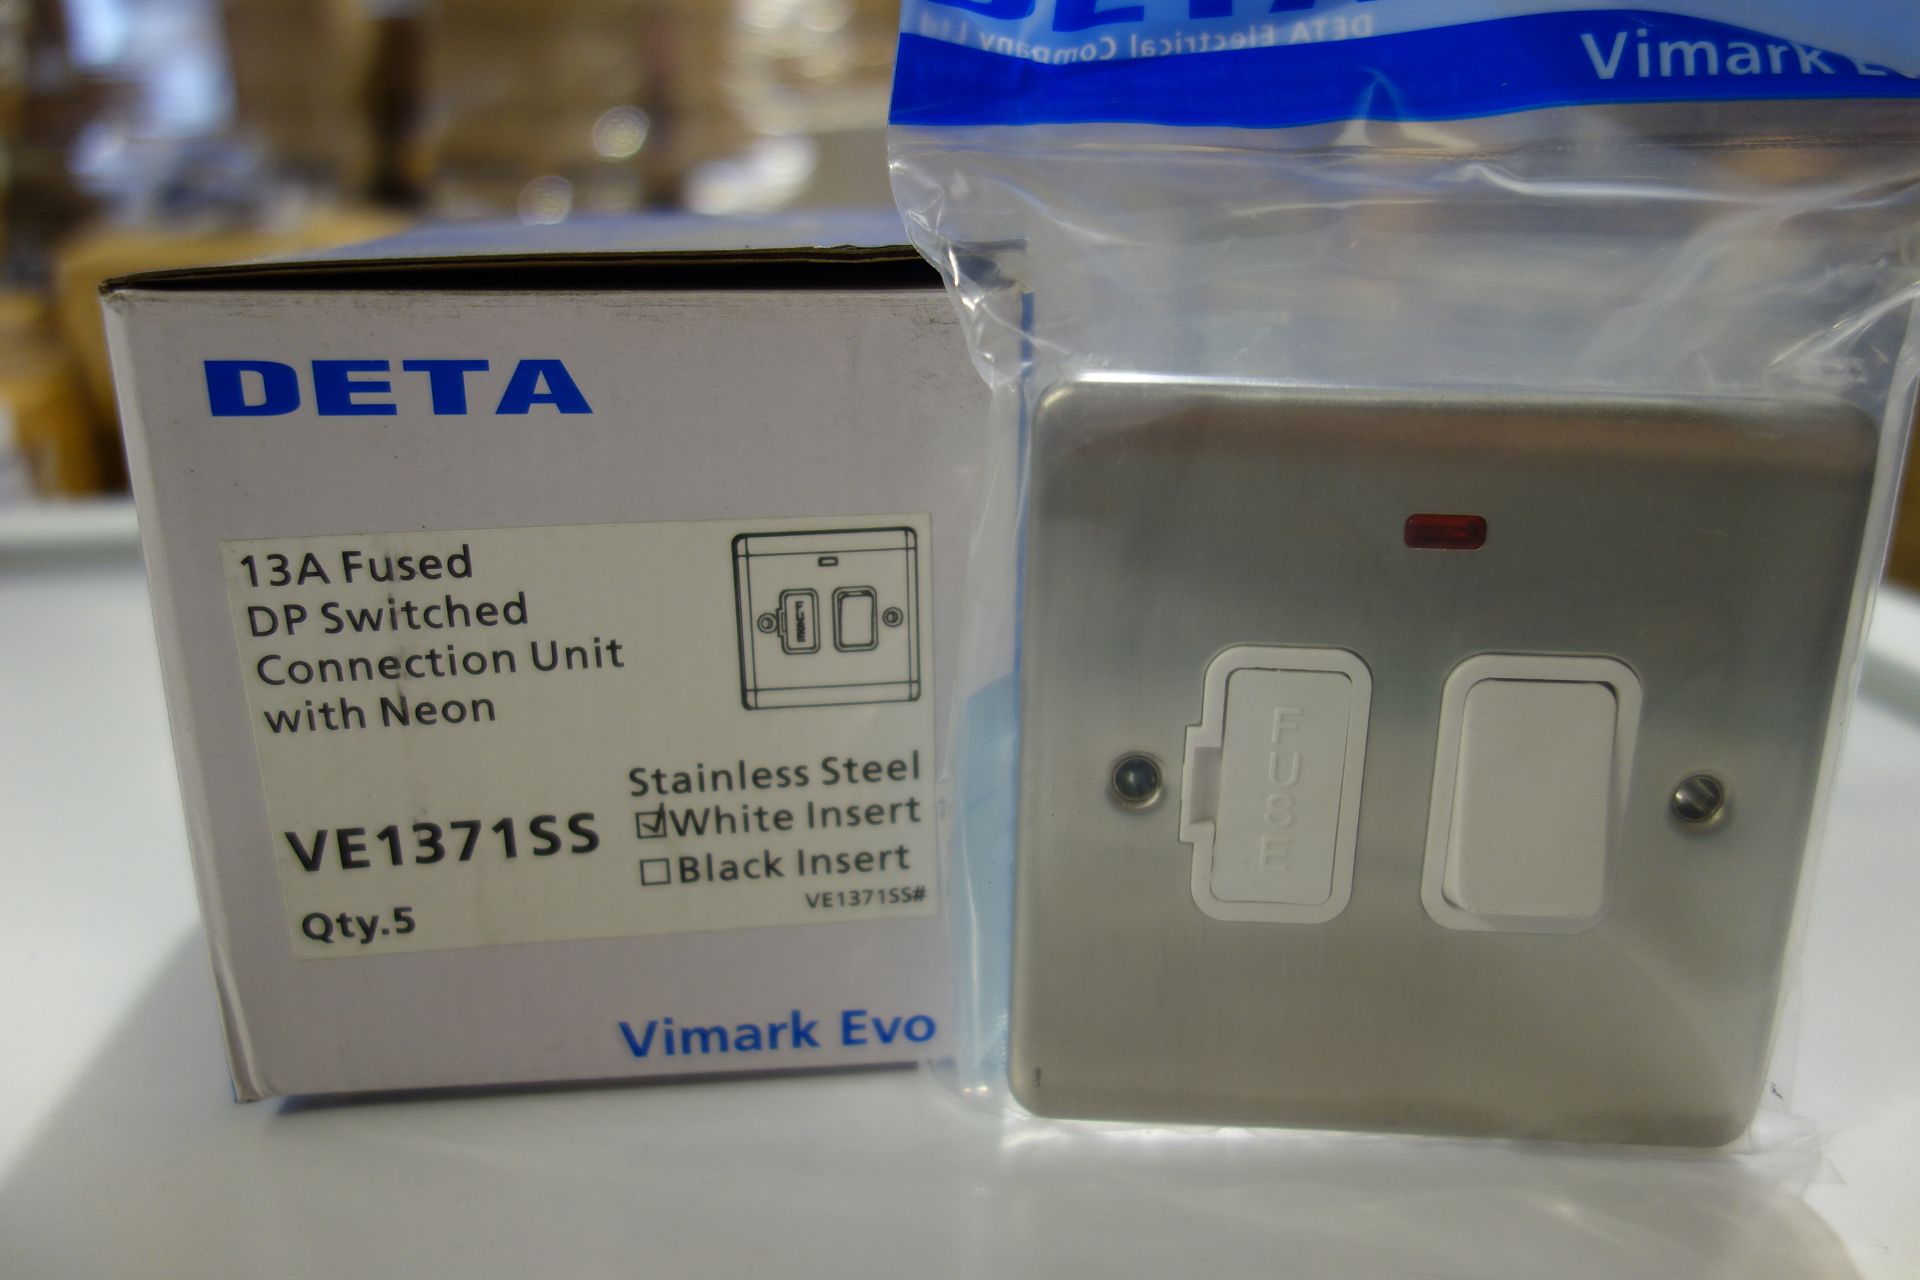 50 X Deta VE1371SSW 13A Fused DP Switched Connection Unit With Neon Stainless Steel White Inserts